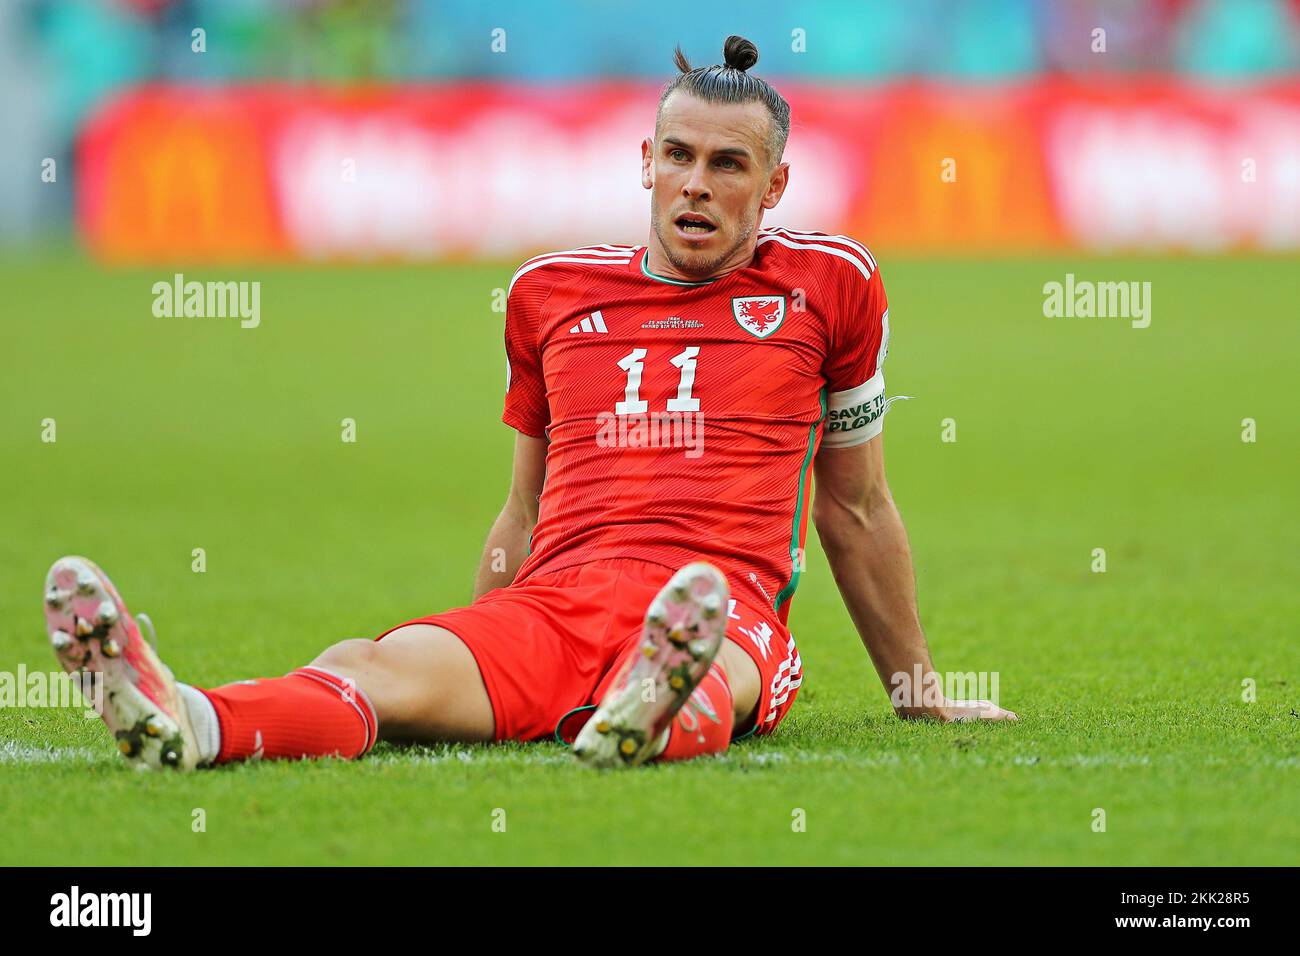 Doha, Qatar. 25th Nov, 2022. Gareth Bale of Wales, regrets the goal scored by Rouzbeh Cheshmi of Iran, during the match between Wales and Iran, for the 2nd round of Group B of the FIFA World Cup Qatar 2022, Ahmed bin Ali Stadium this Friday, 25. 30761 (Heuler Andrey/SPP) Credit: SPP Sport Press Photo. /Alamy Live News Stock Photo